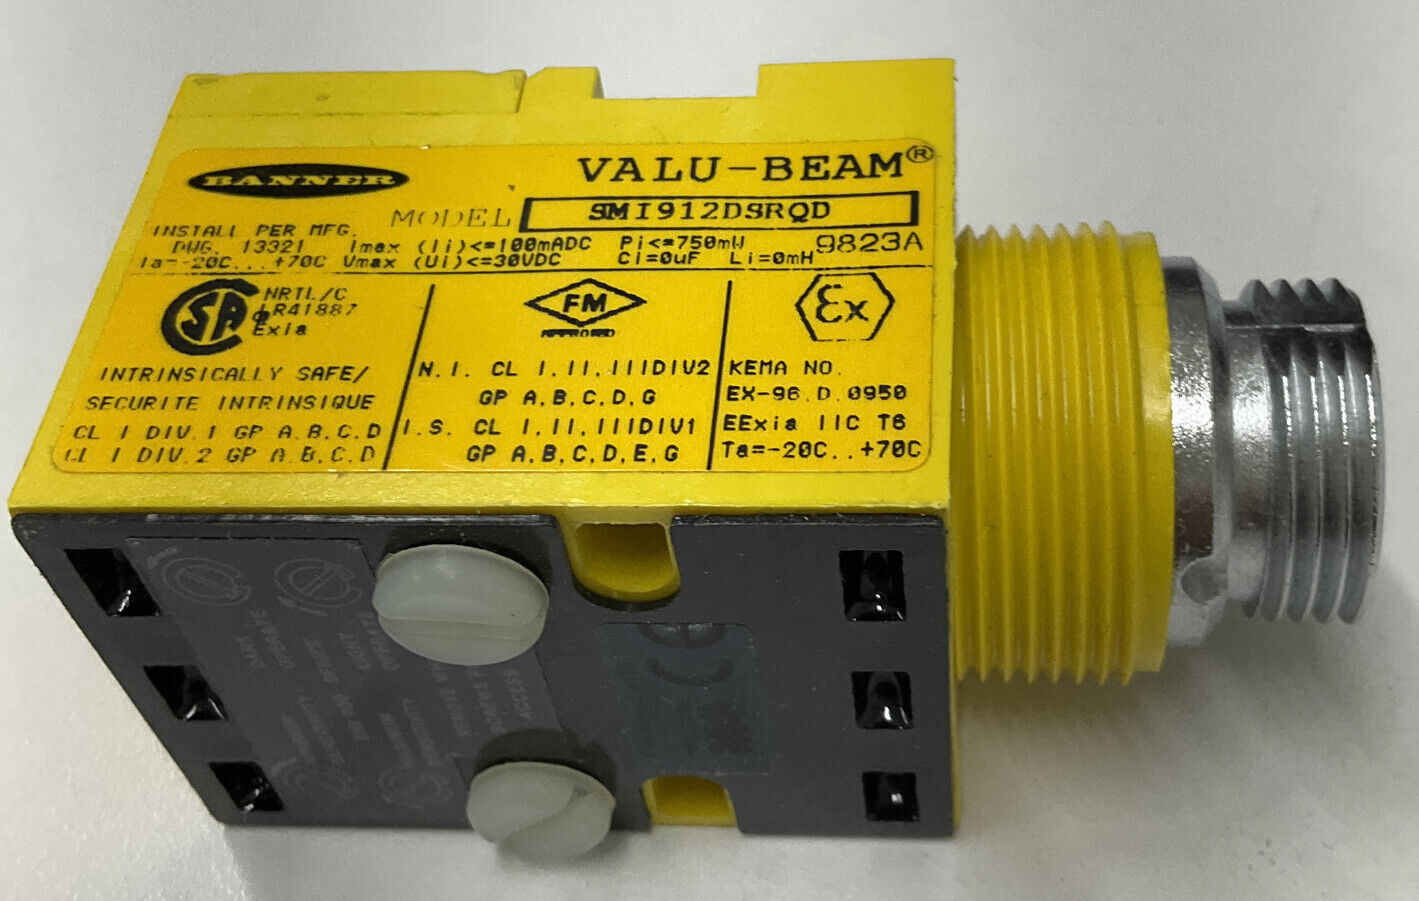 Banner SMI912SRQD New Valu-Beam Photelectric Scanner (CL214)